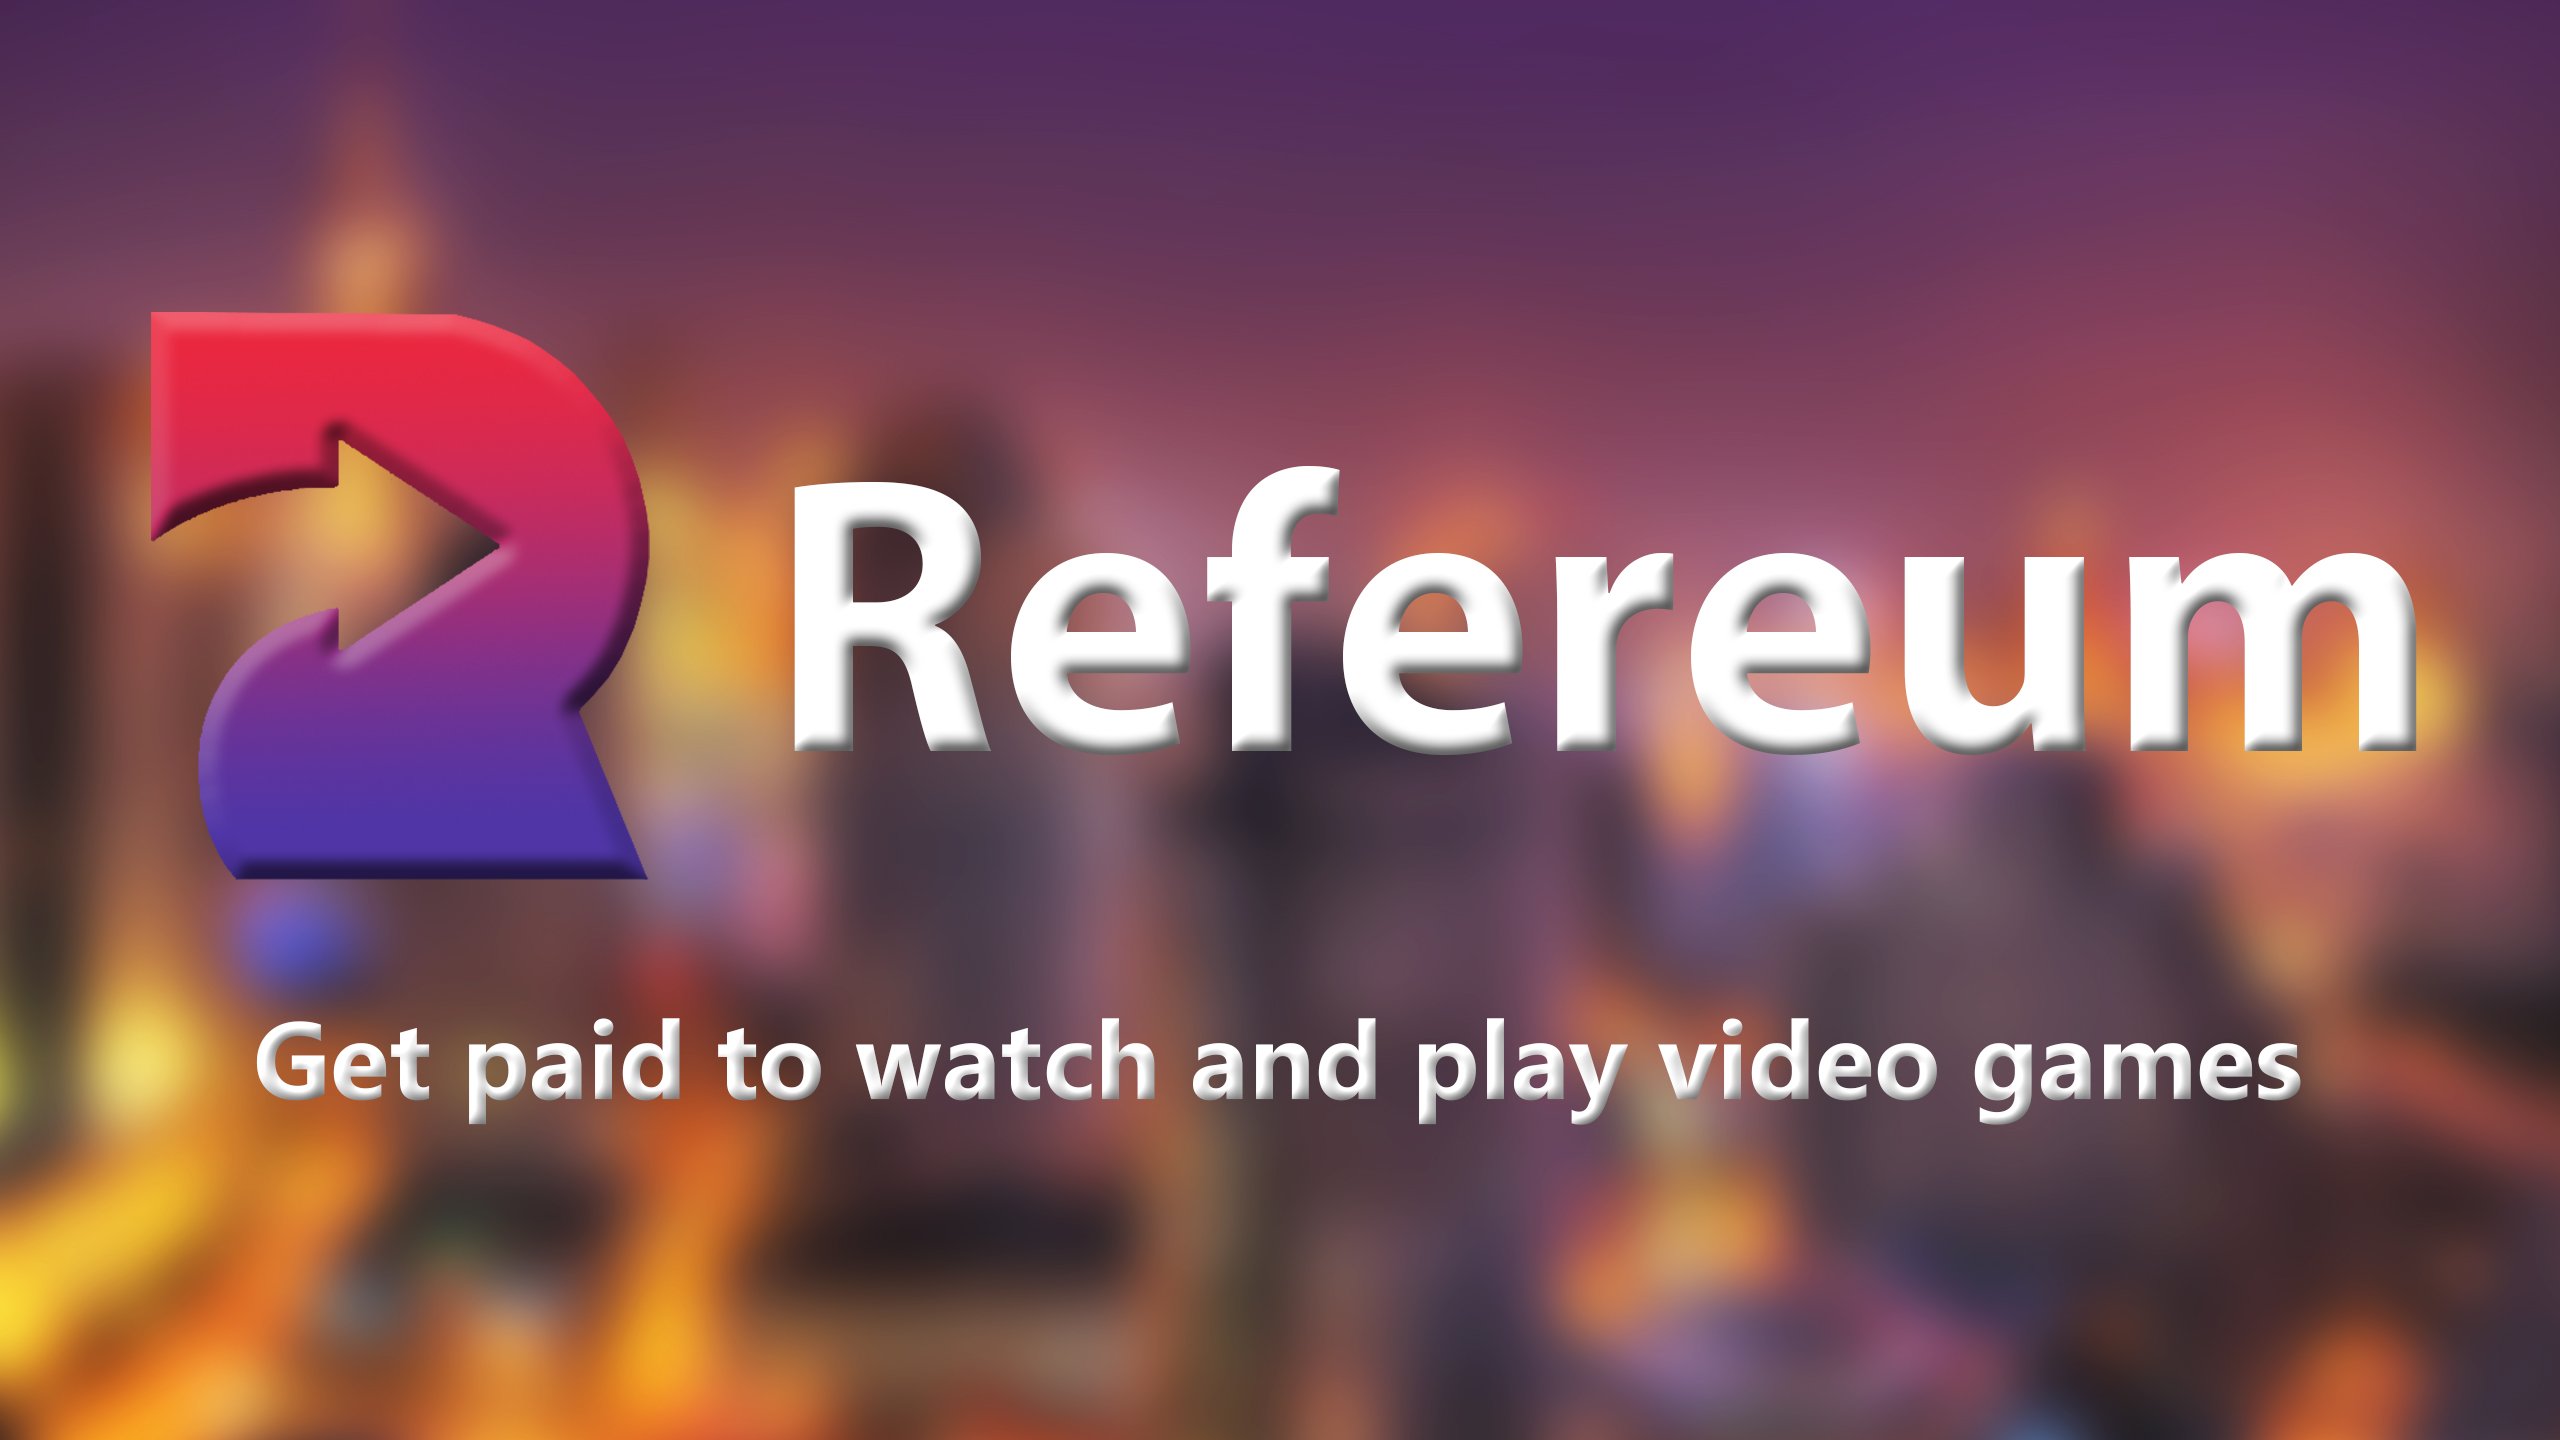 Refereum Rfr Get Paid To Watch And Play Video Games - 